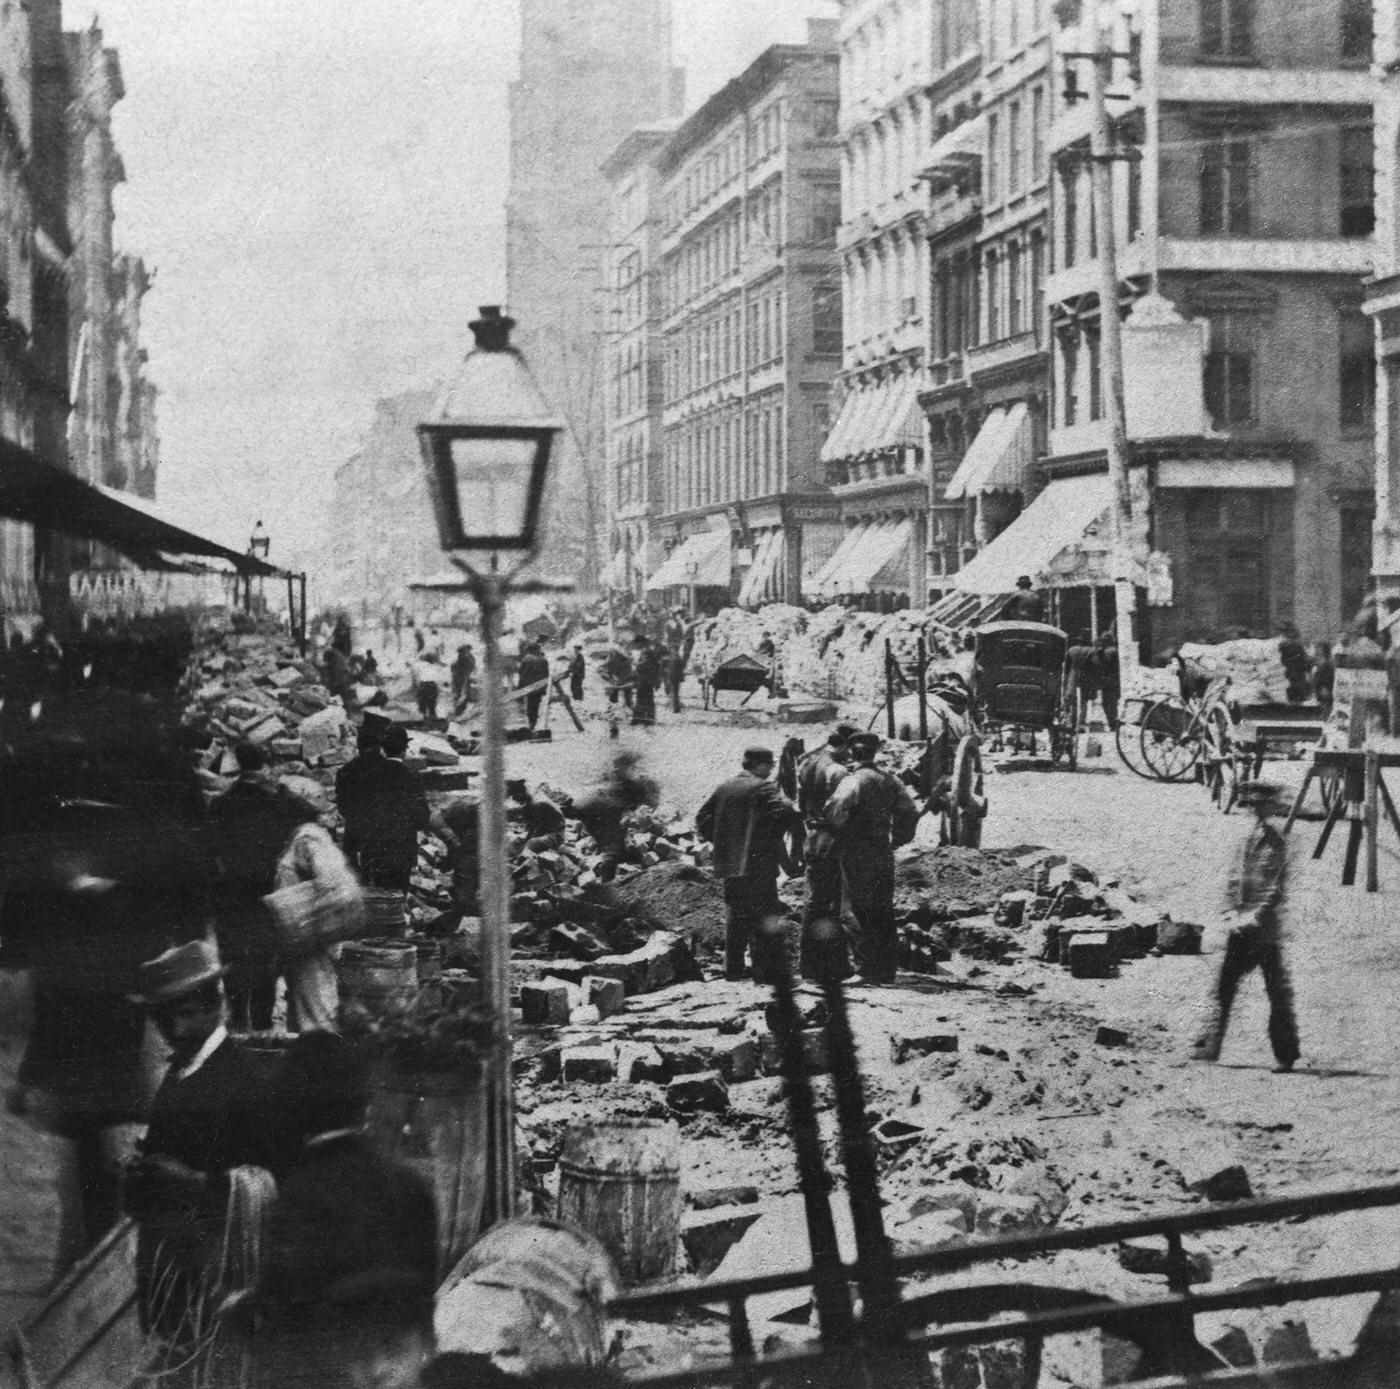 Construction Workers Preparing For Laying Pavement In Lower Manhattan, 1885